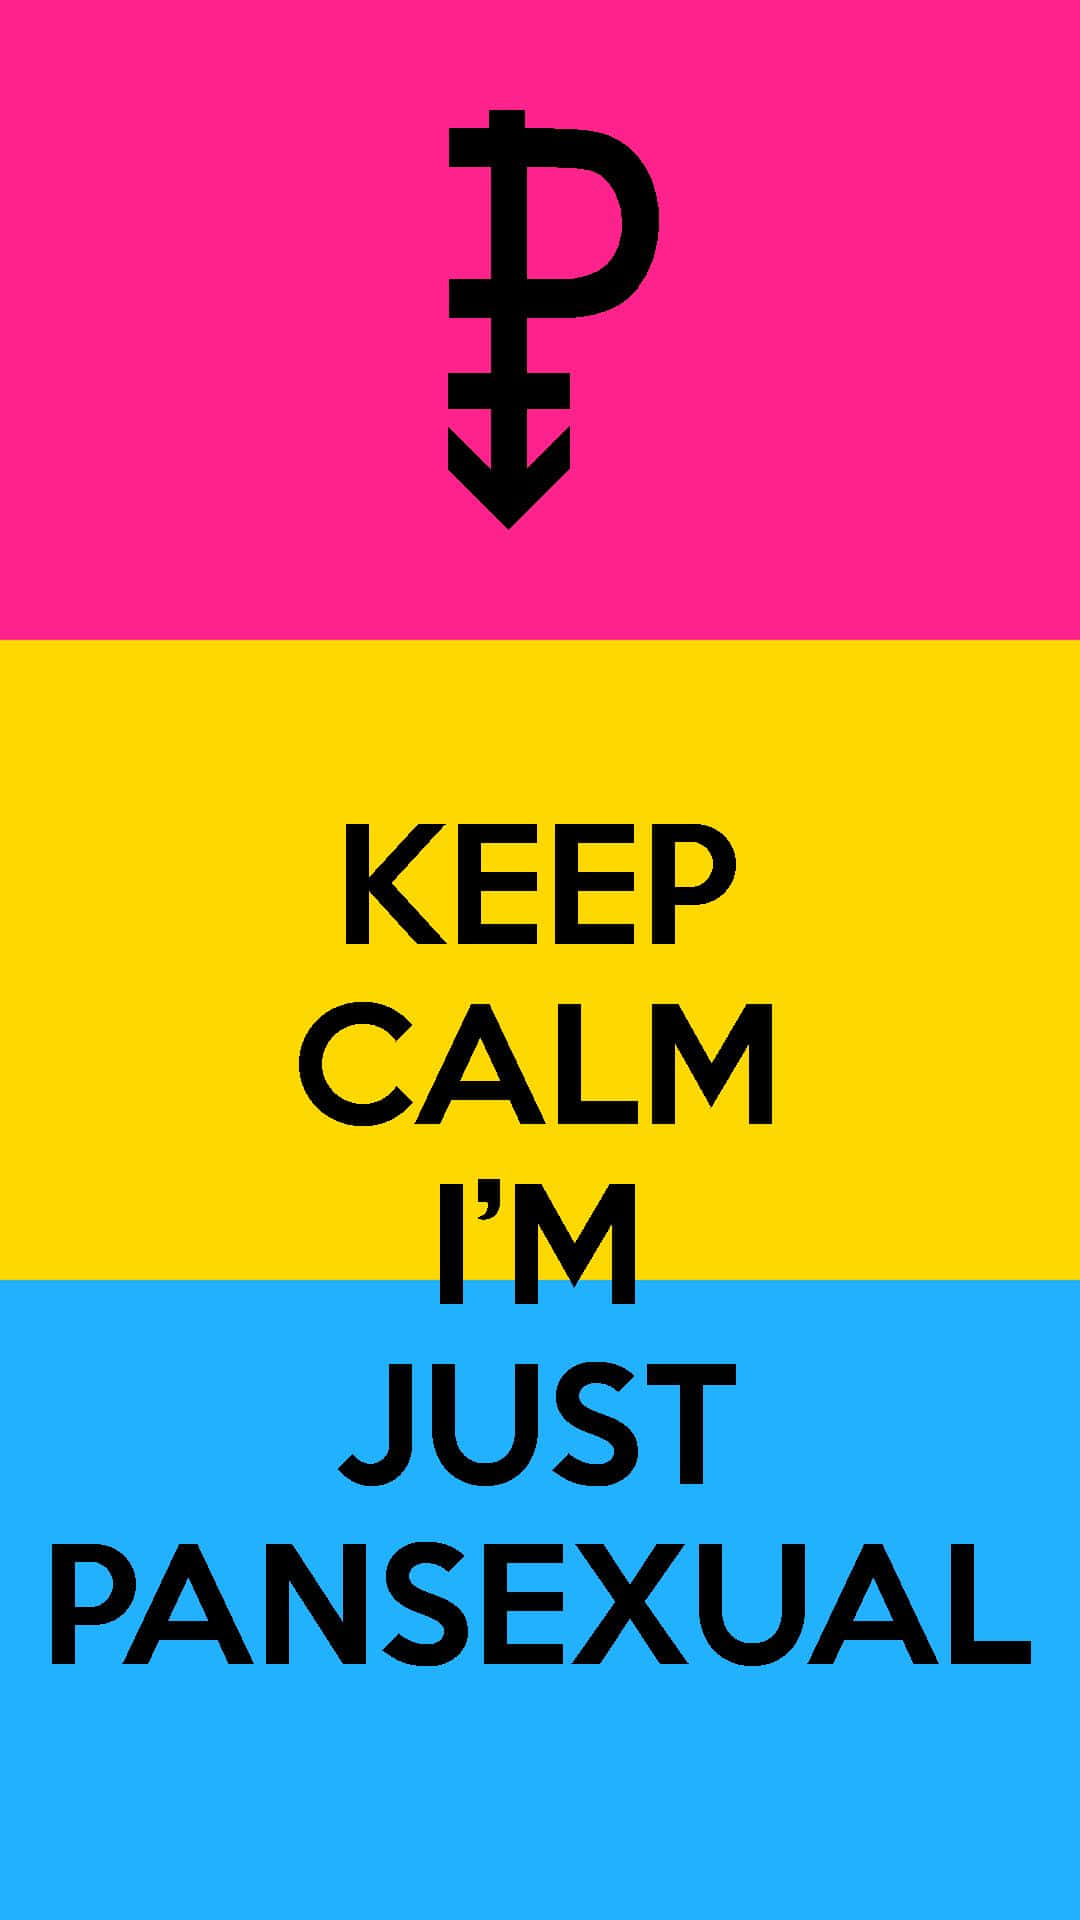 I made a lil pan wallpaper  rpansexual